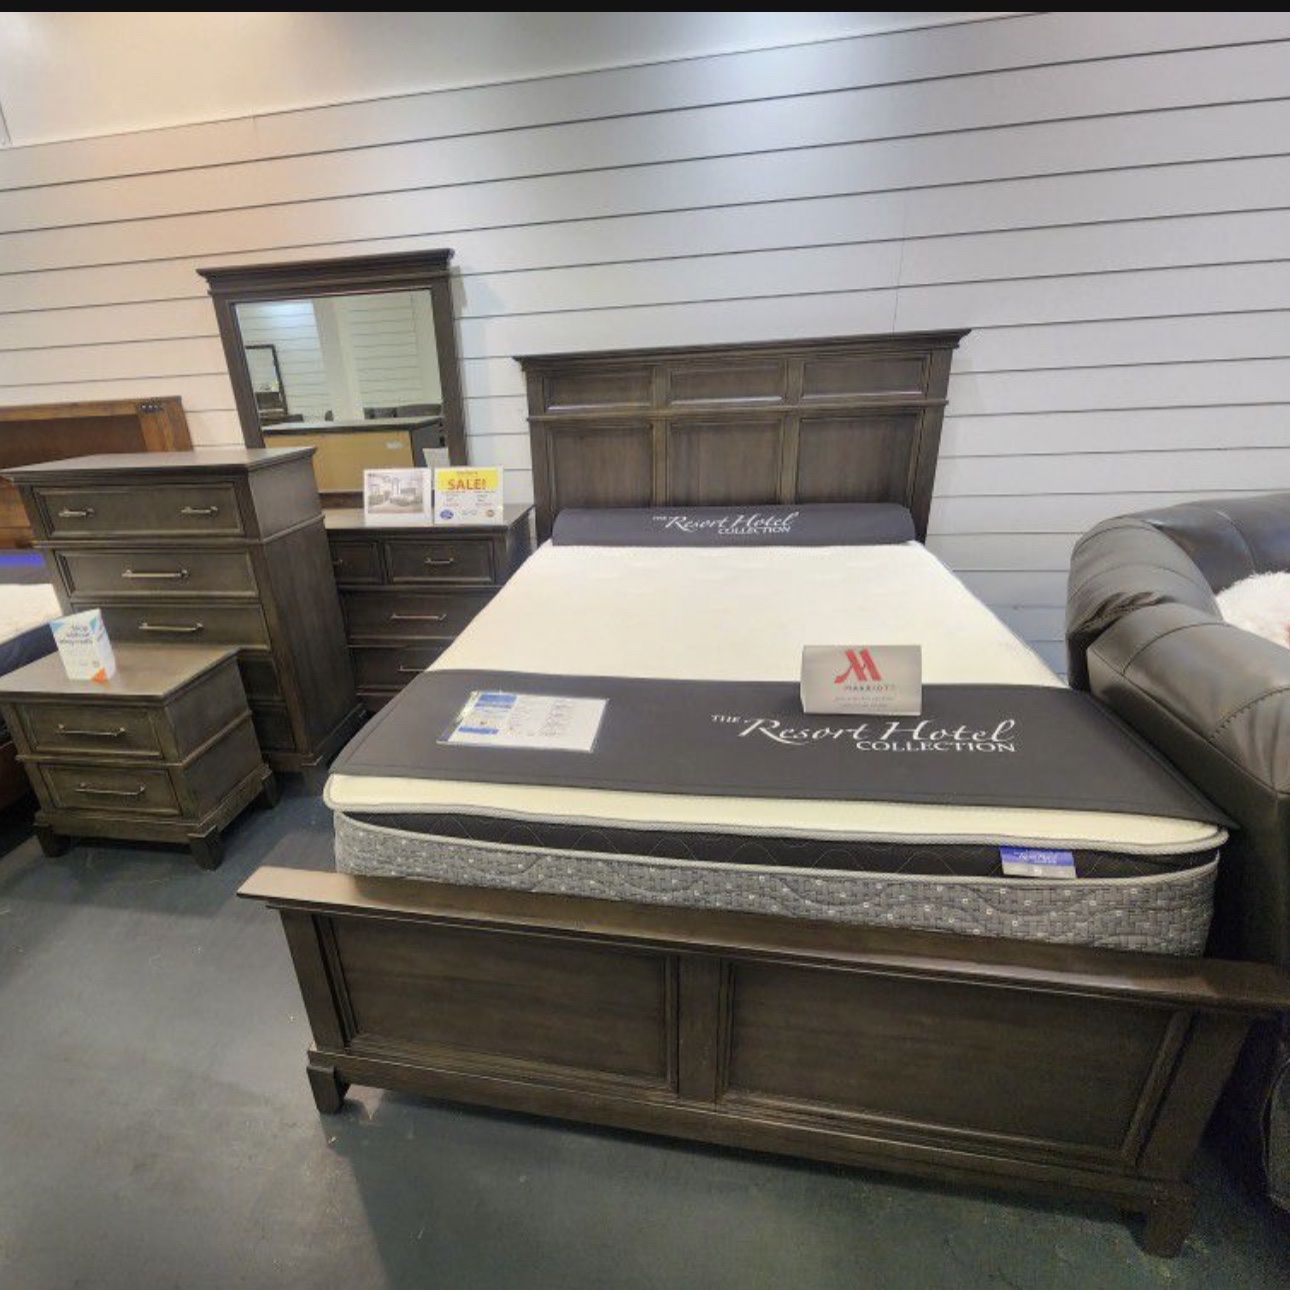 BEAUTIFUL NEW LINDEX QUEEN BEDROOM SET ON SALE ONLY $799. IN STOCK SAME DAY DELIVERY 🚚 EASY FINANCING 